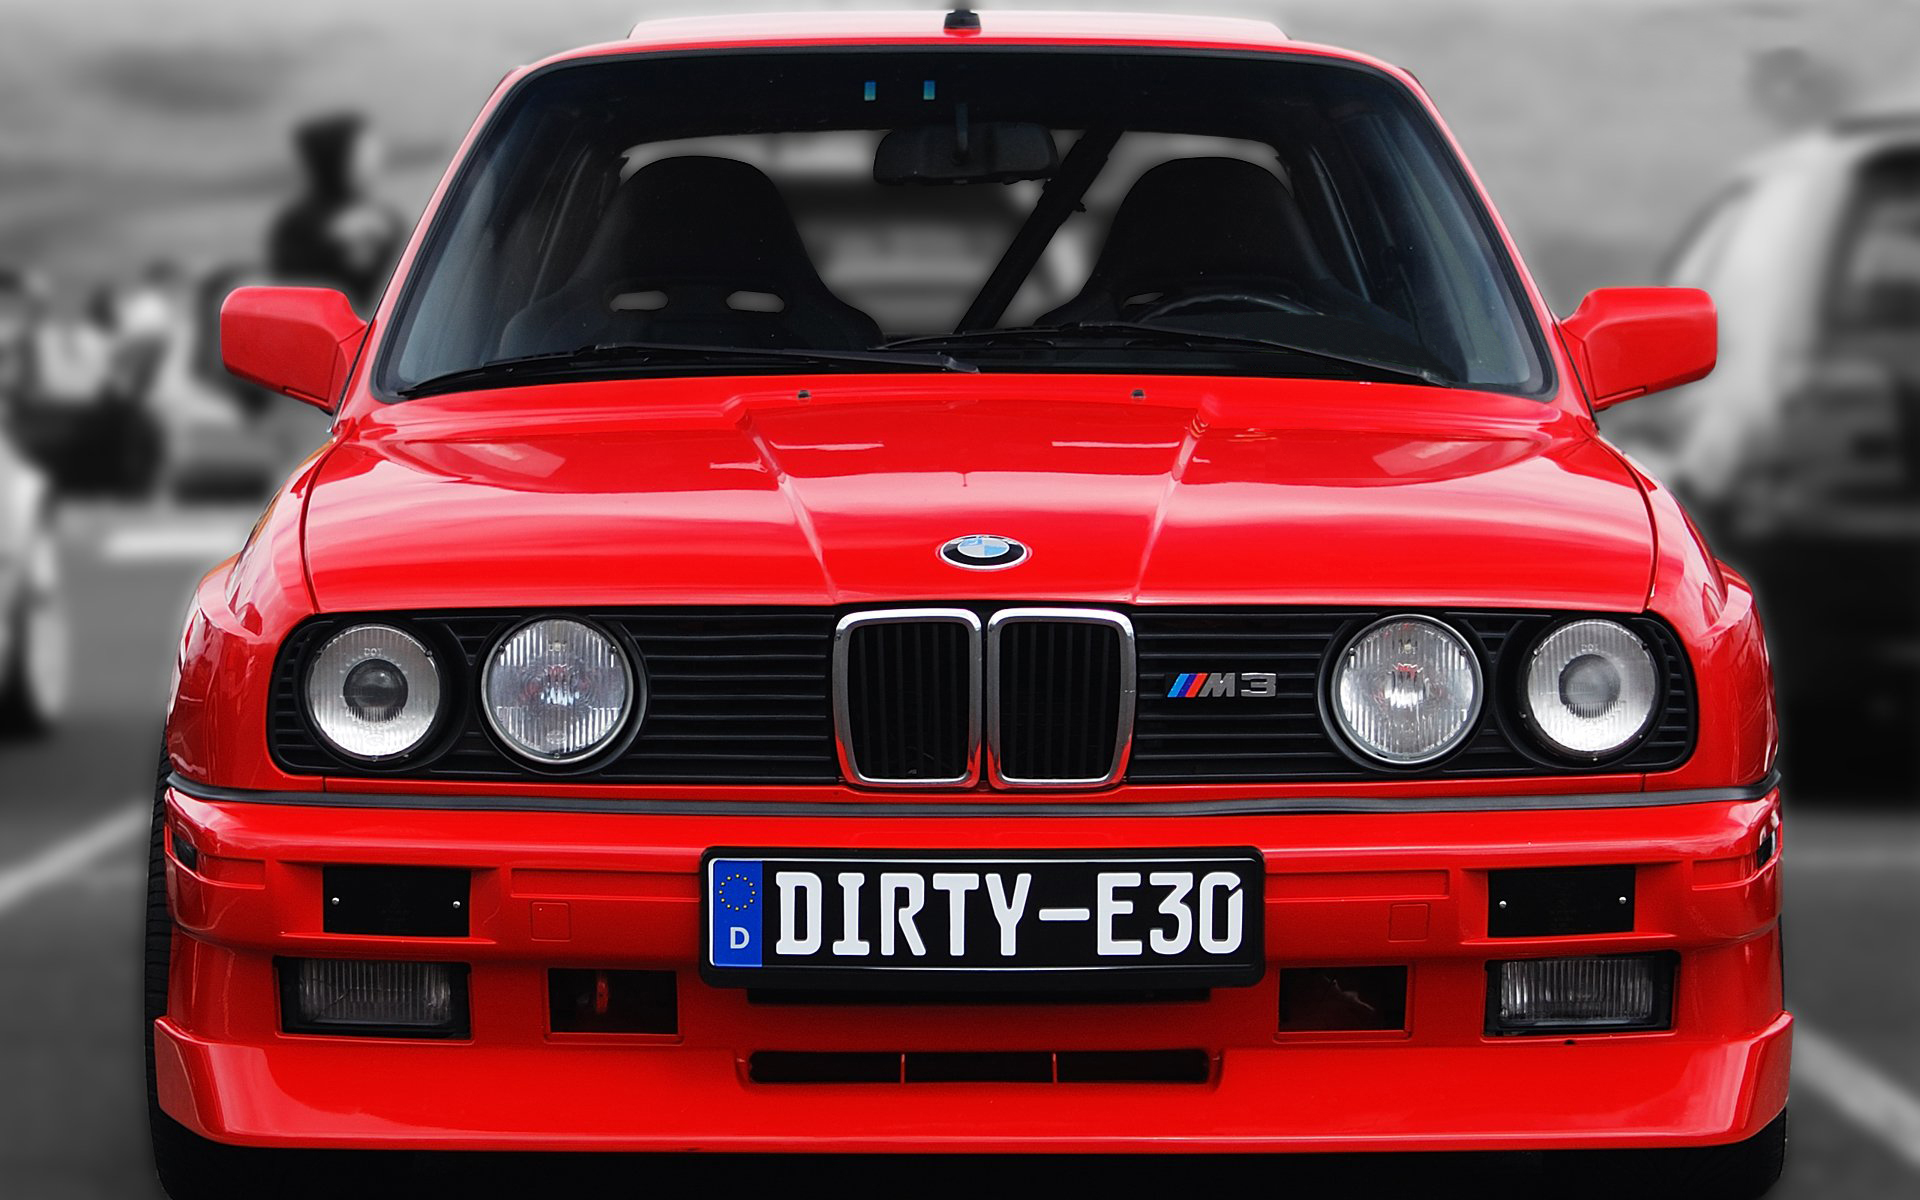 Related Post "DOWNLOAD Bmw E30 Wallpapers"